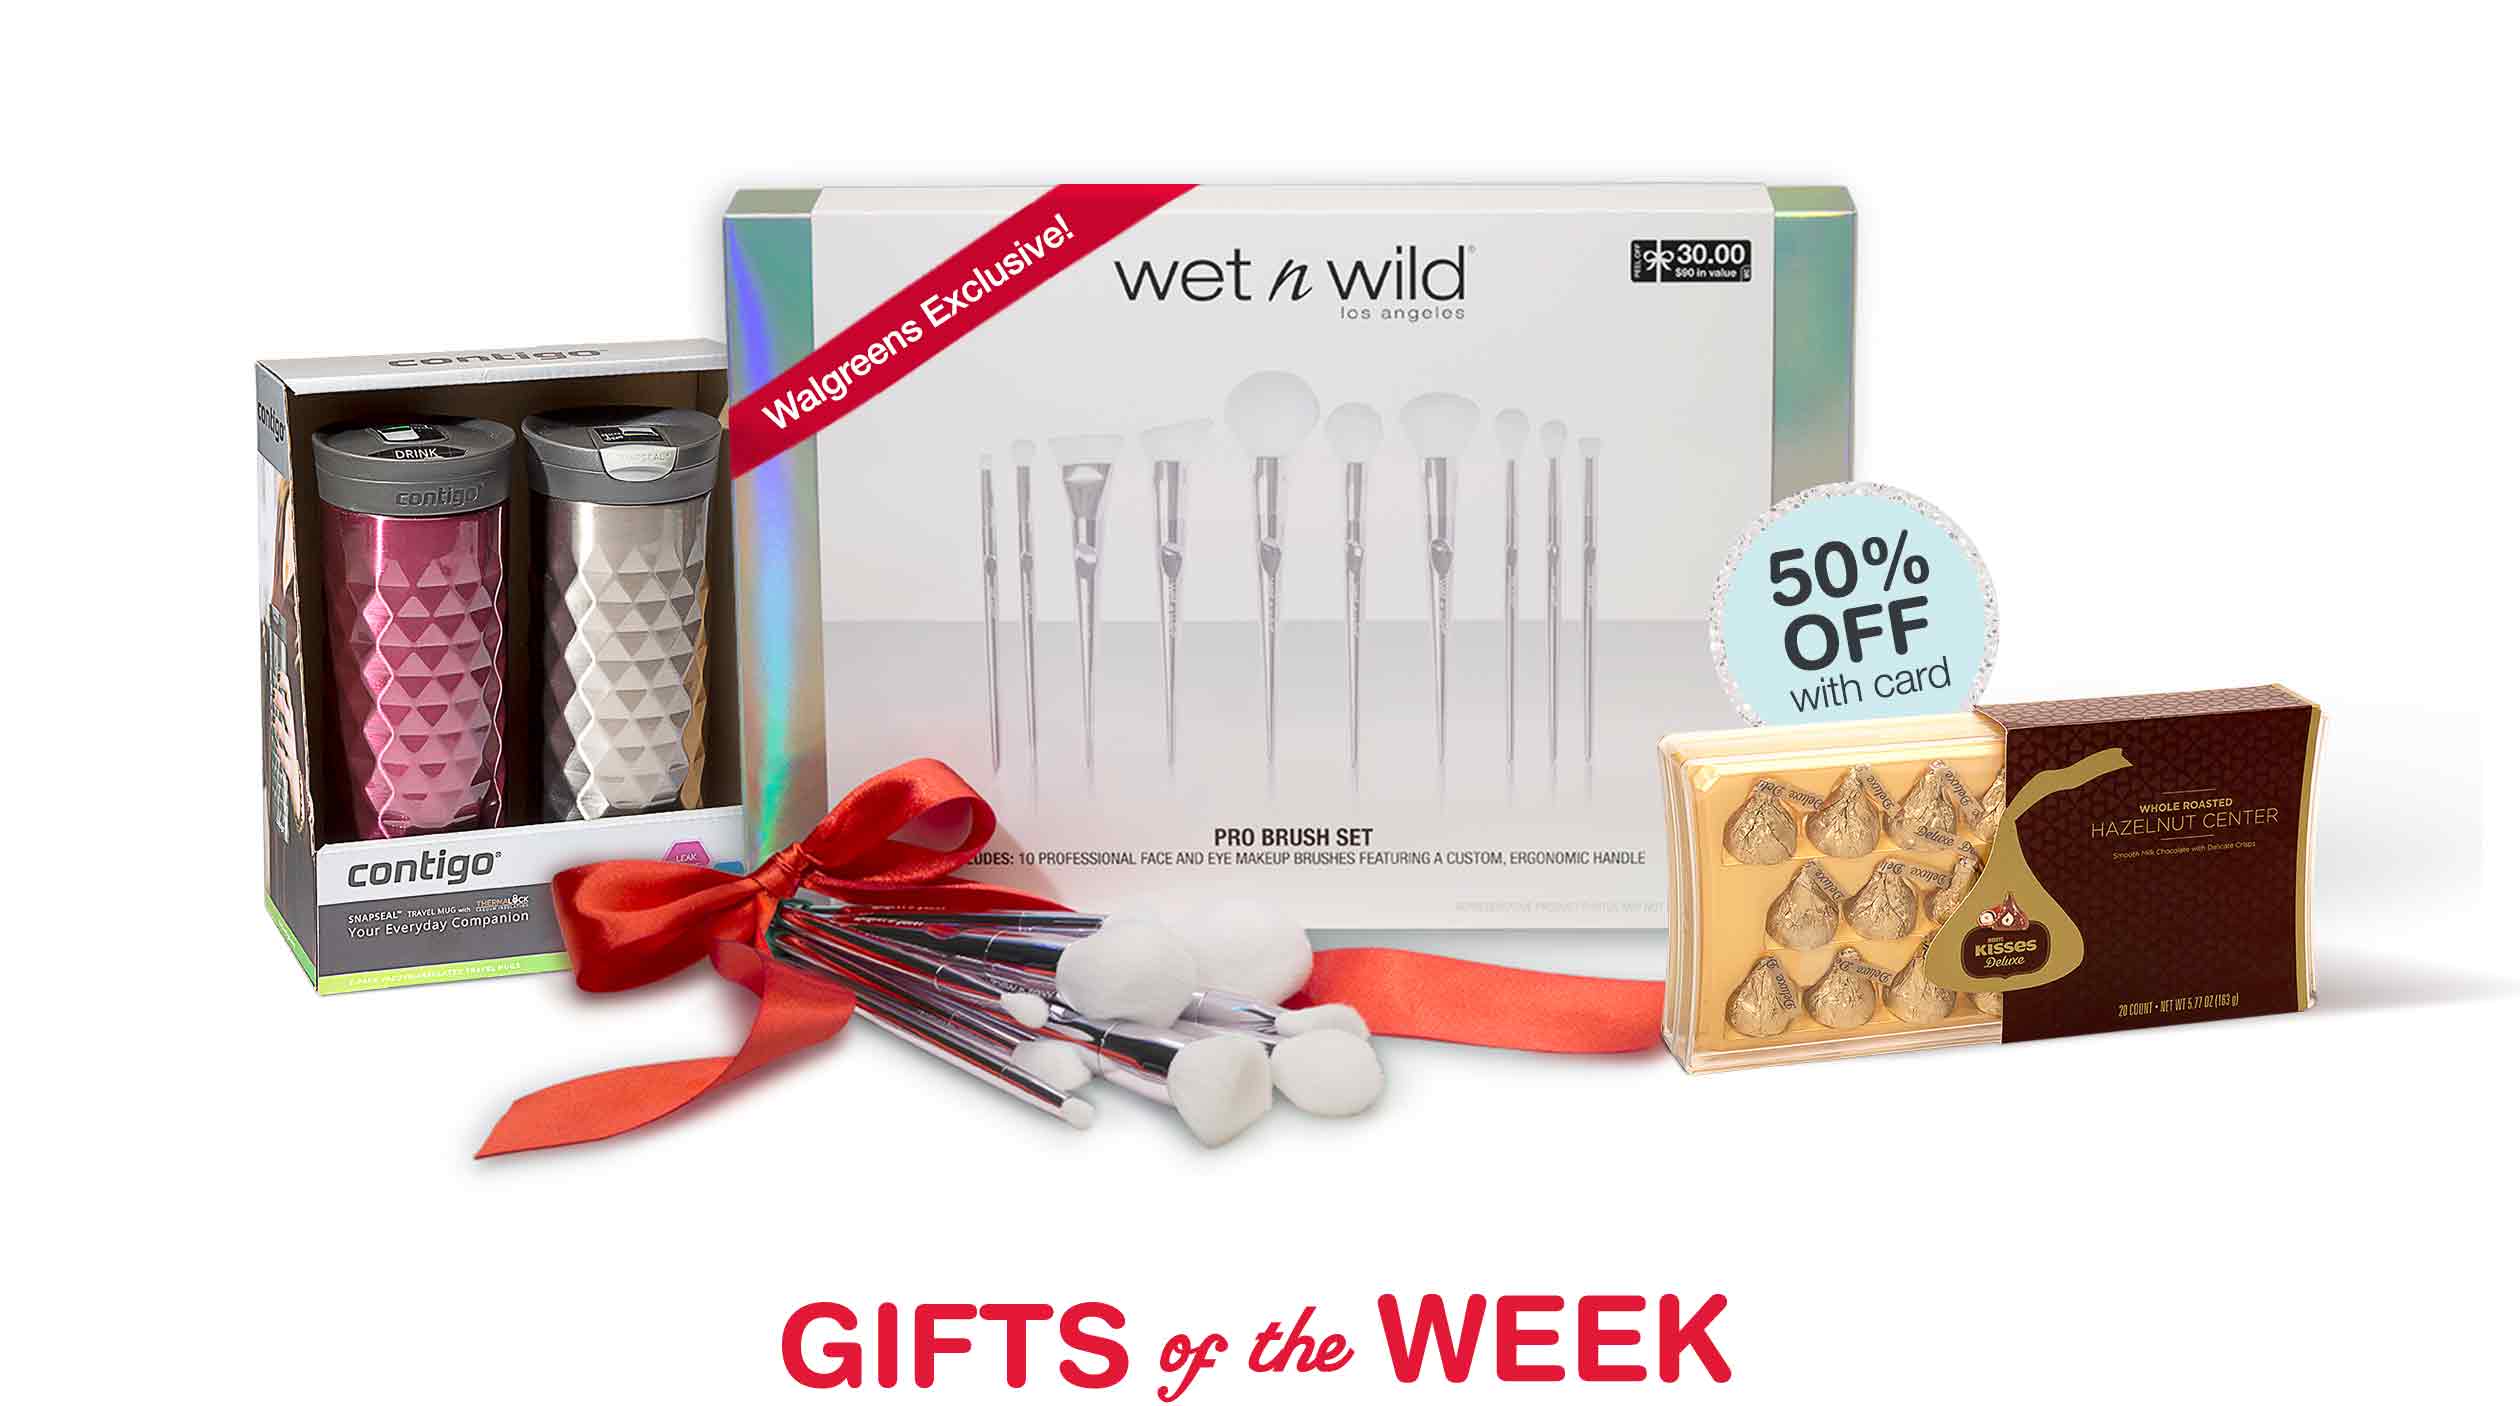 Gifts of the Week. 50% OFF with card.